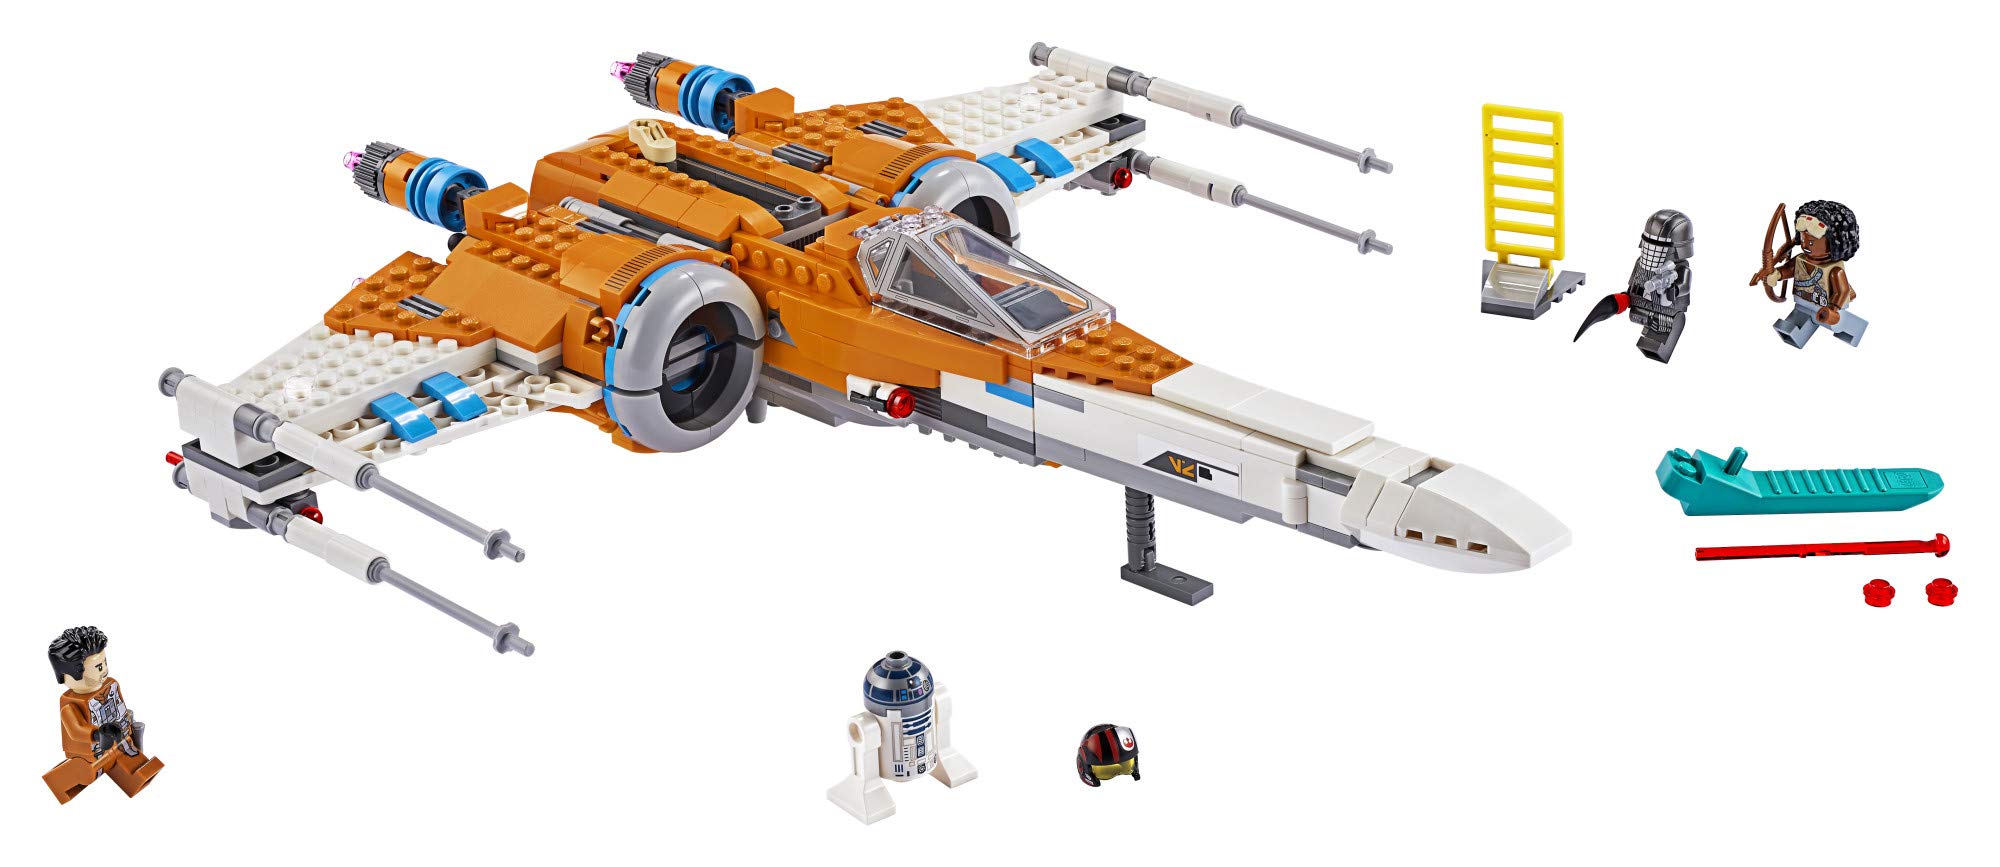 LEGO Star Wars Poe Dameron's X-Wing Fighter 75273 Building Kit, Cool Construction Toy for Kids, New 2020 (761 Pieces)